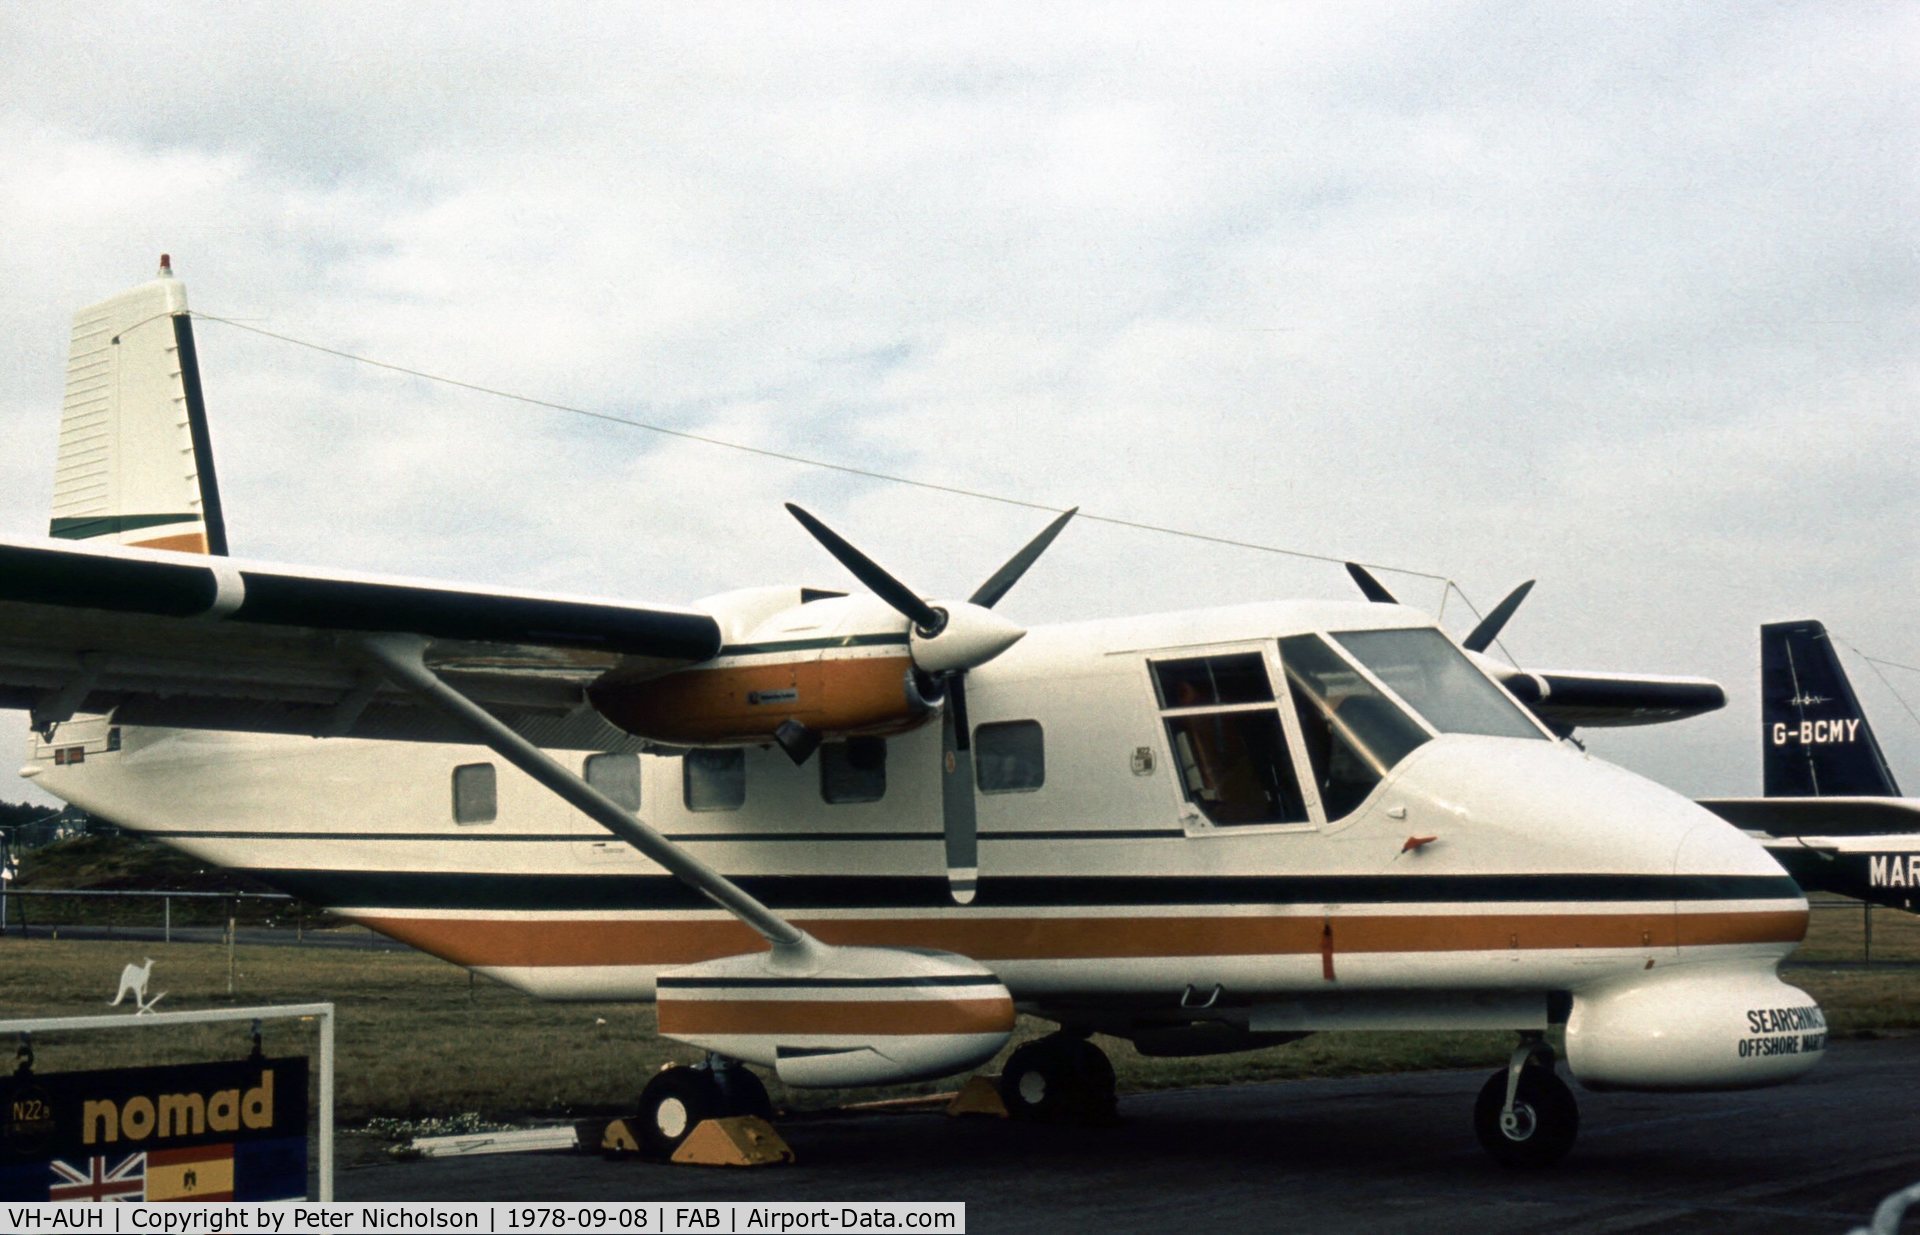 VH-AUH, GAF N22B Nomad C/N N22B-4, Another view of the Nomad Searchmaster at the 1978 Farnborough Airshow.